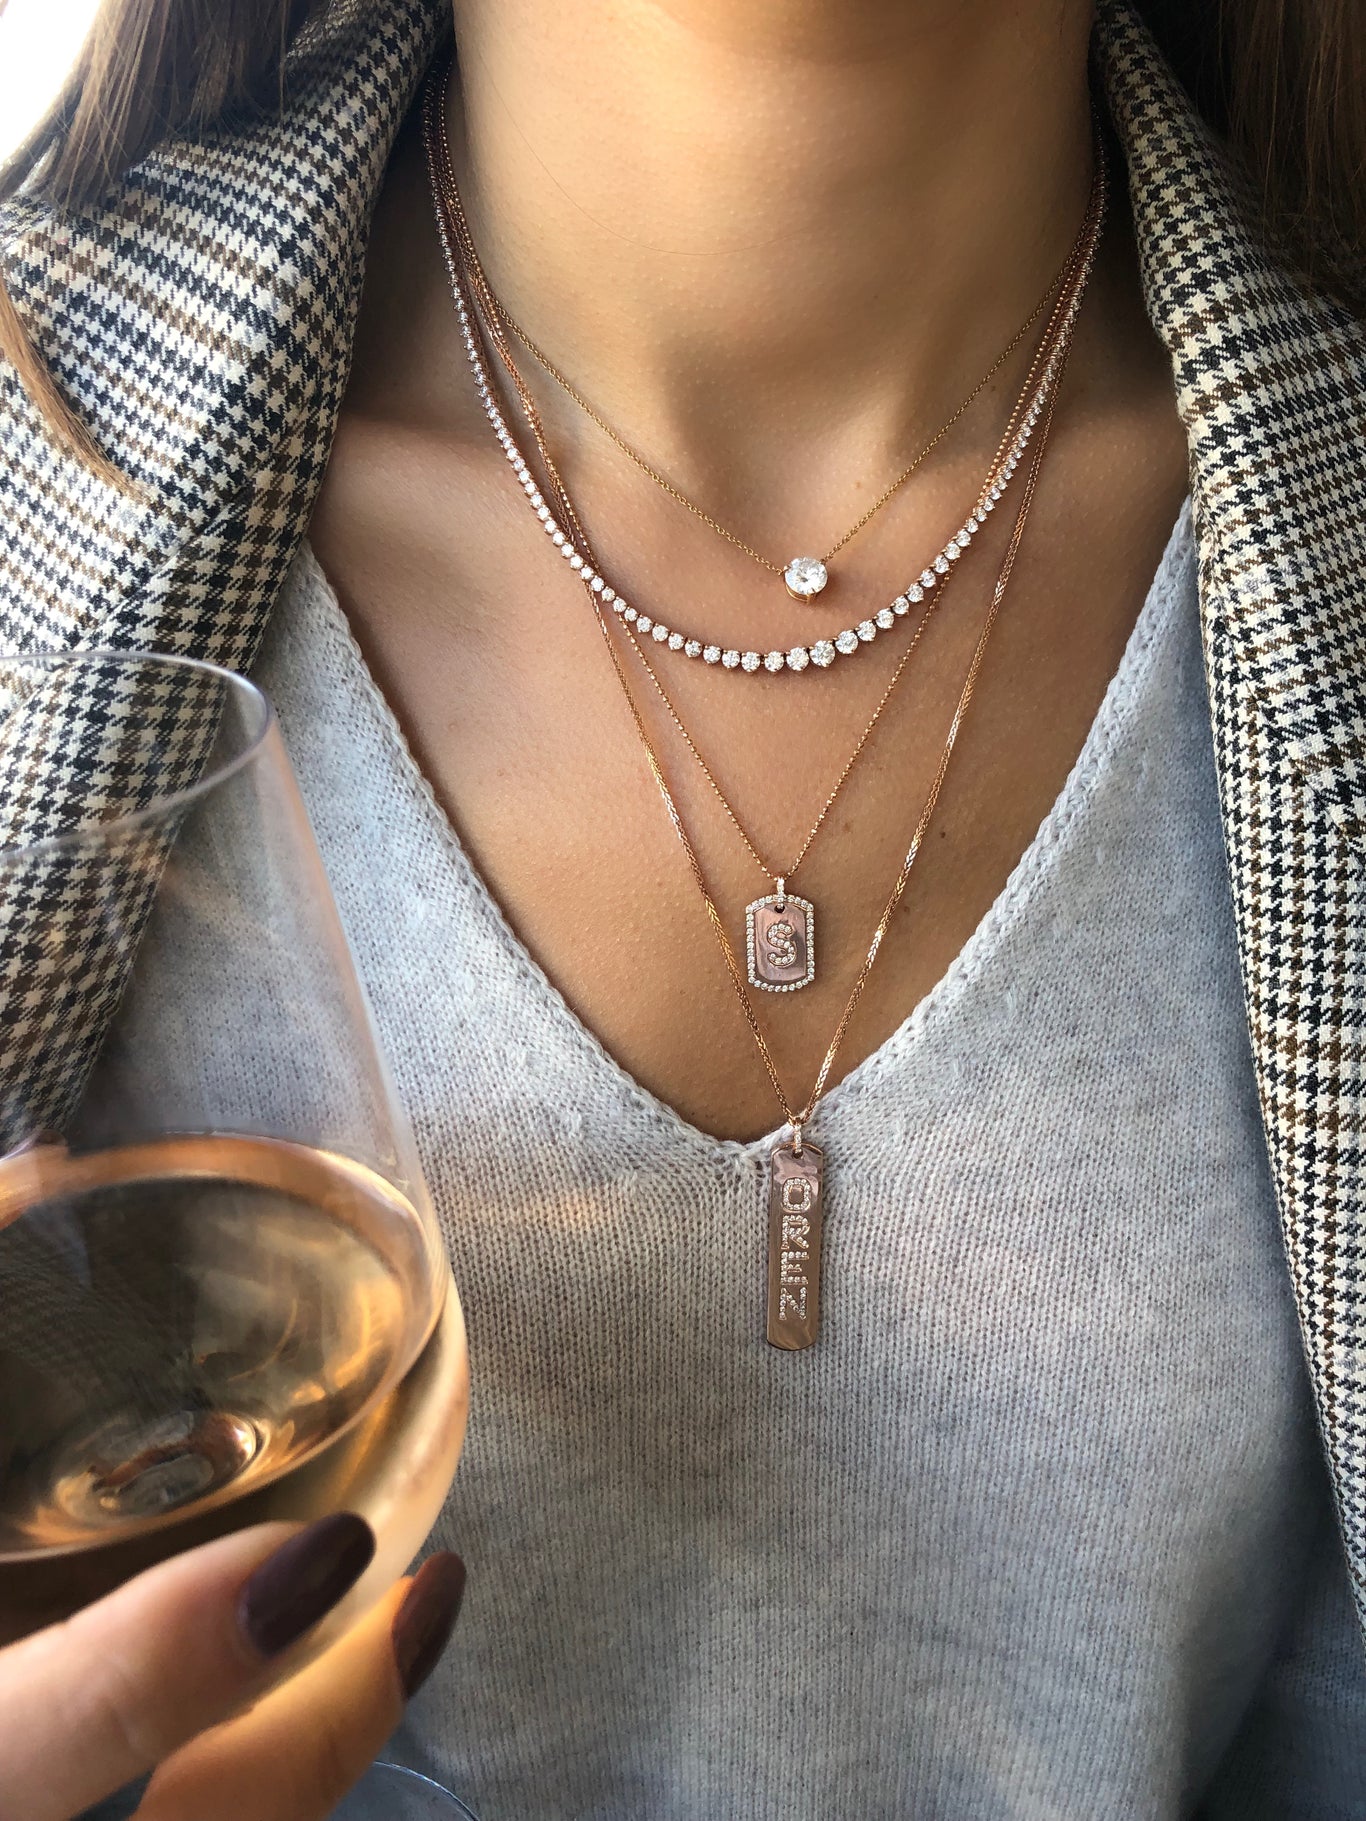 6.50 Carat Graduating Tennis Necklace shown layered with the Diamond Initial Dogtag Necklace and the Longtag Necklace.